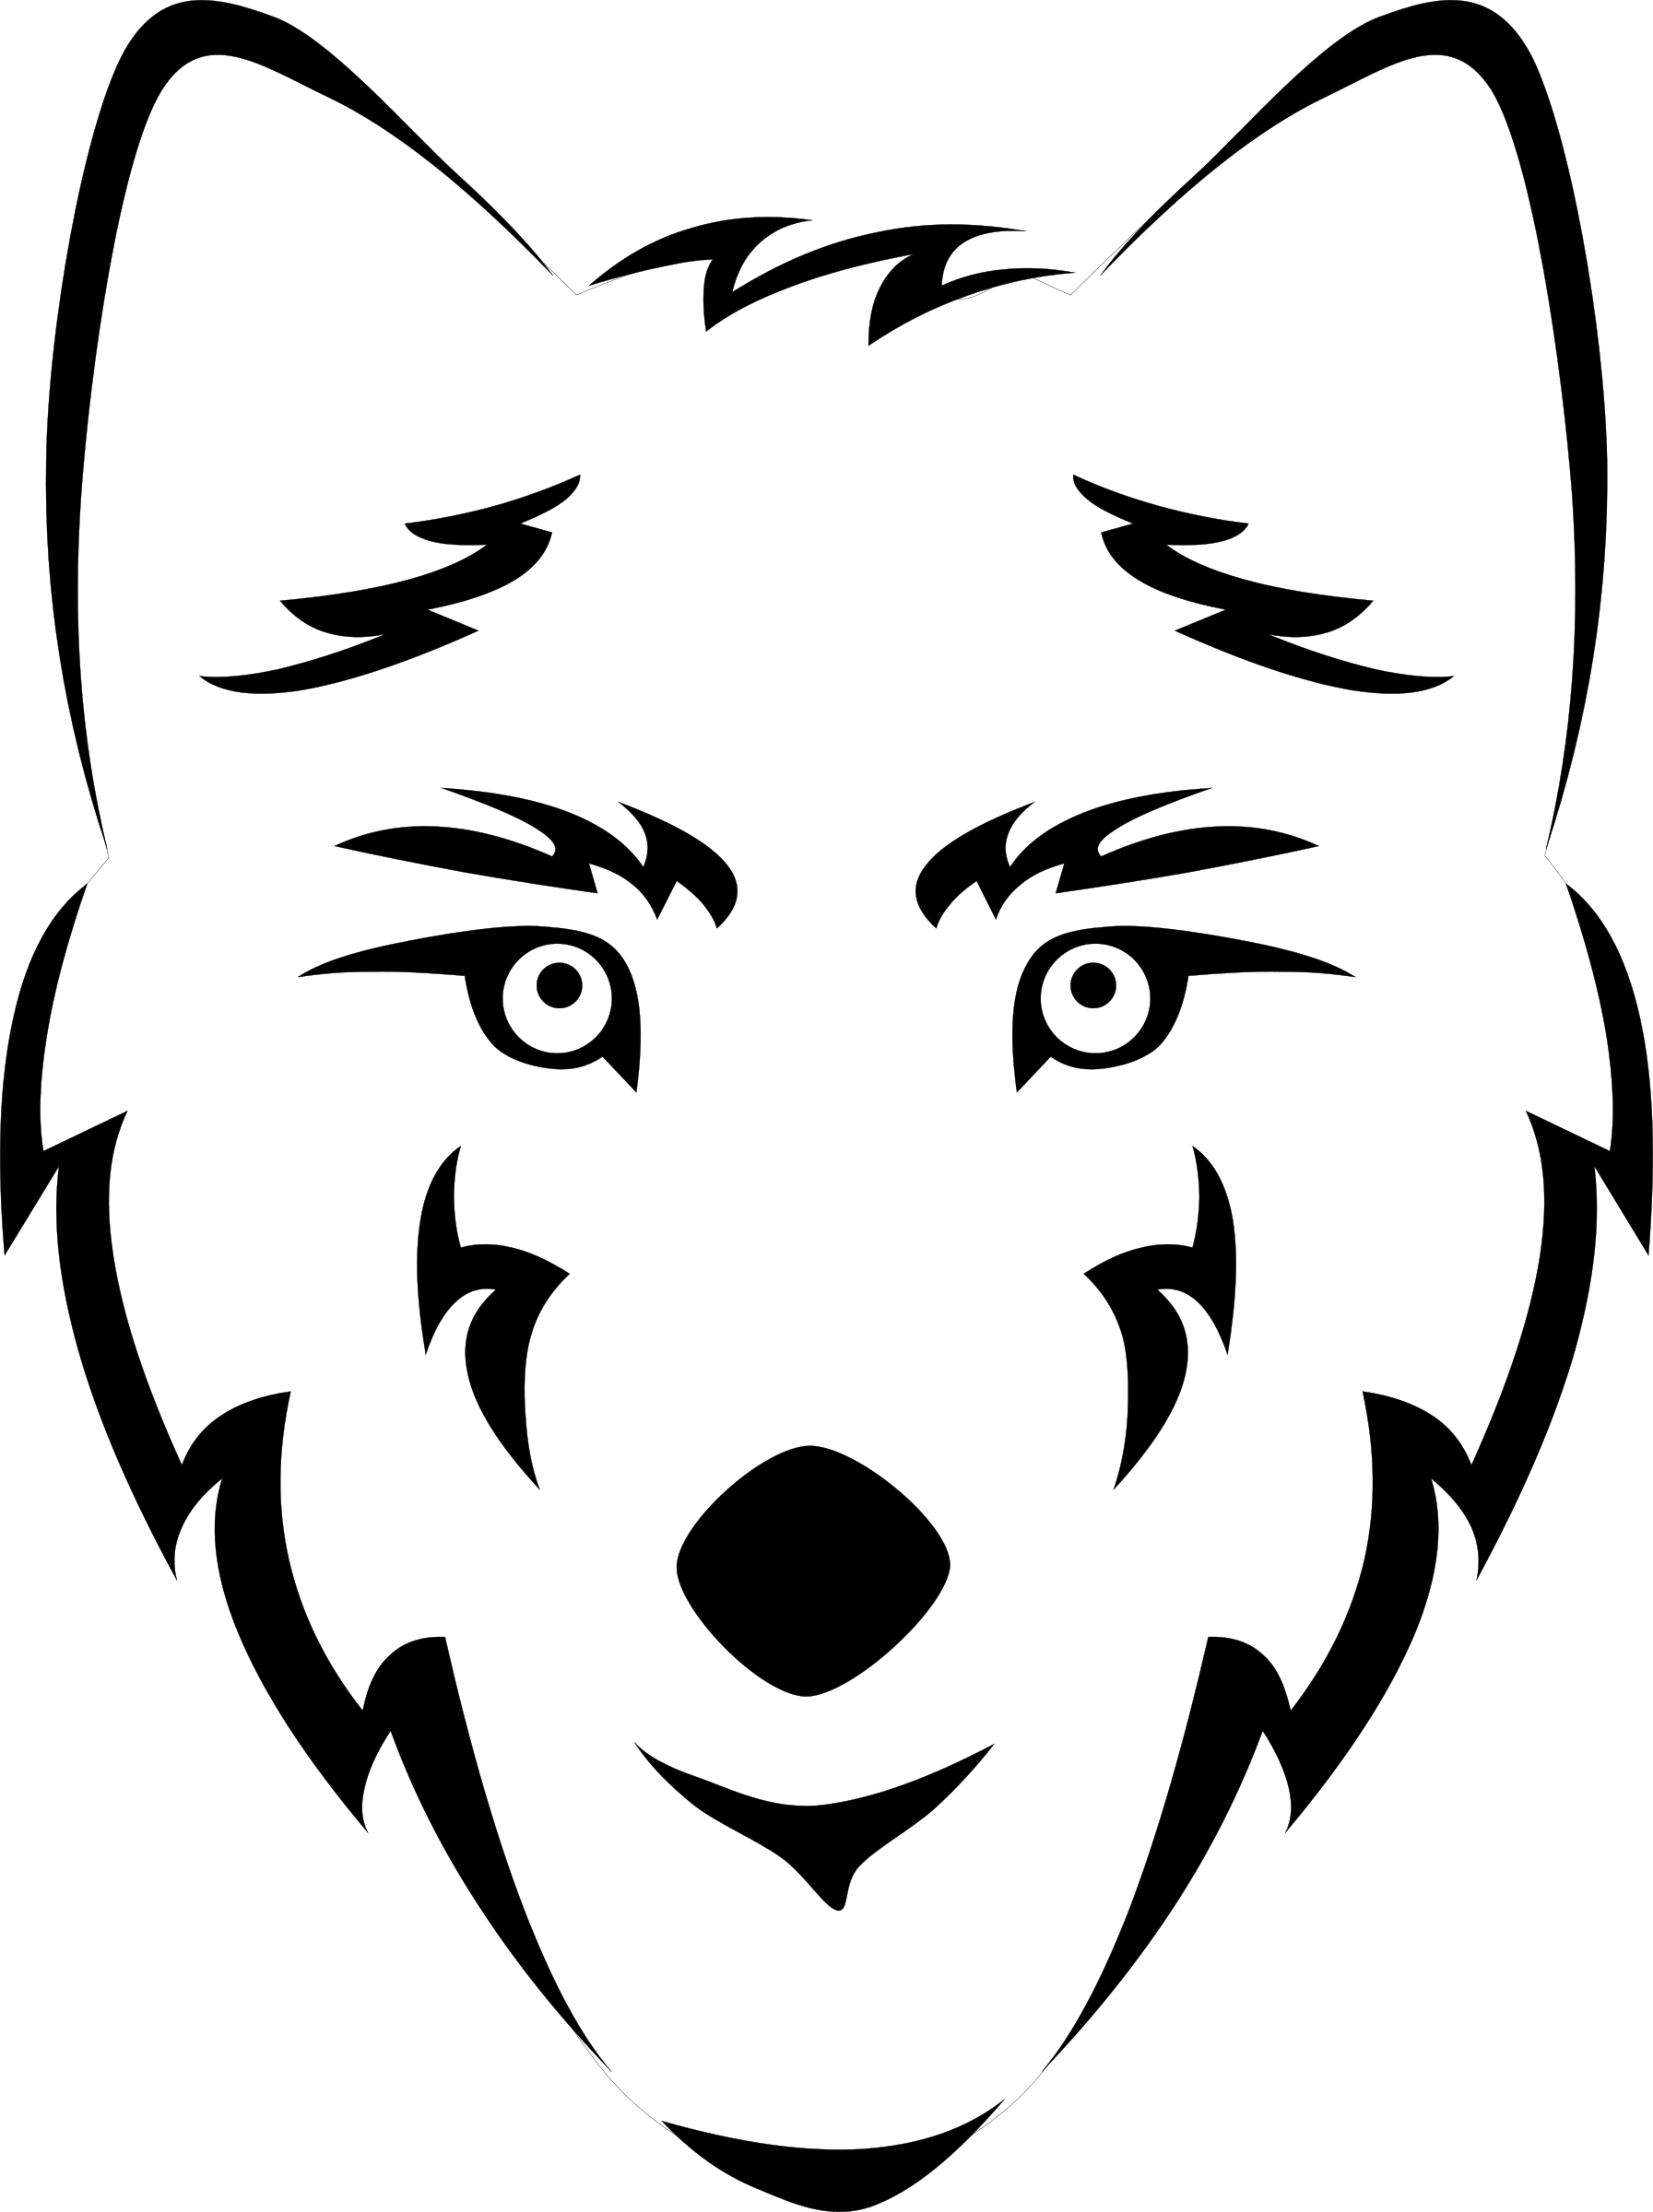 Wolves clipart nose, Wolves nose Transparent FREE for.